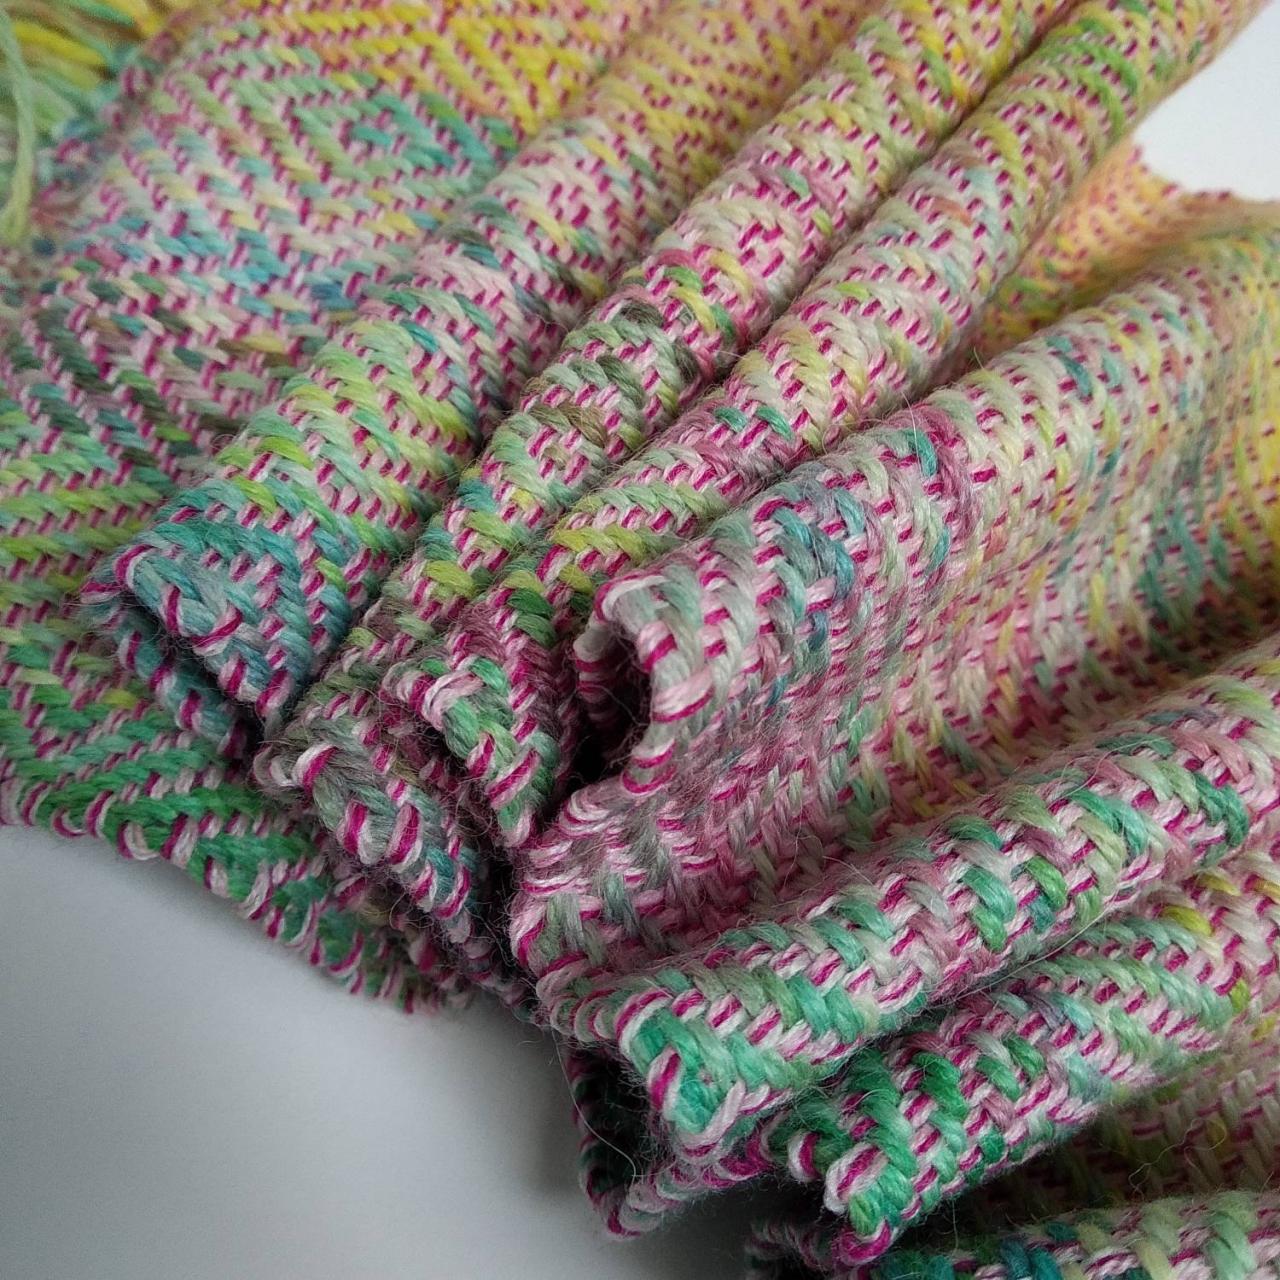 Handwoven hand-dyed scarf, baby scarf, girly scarf